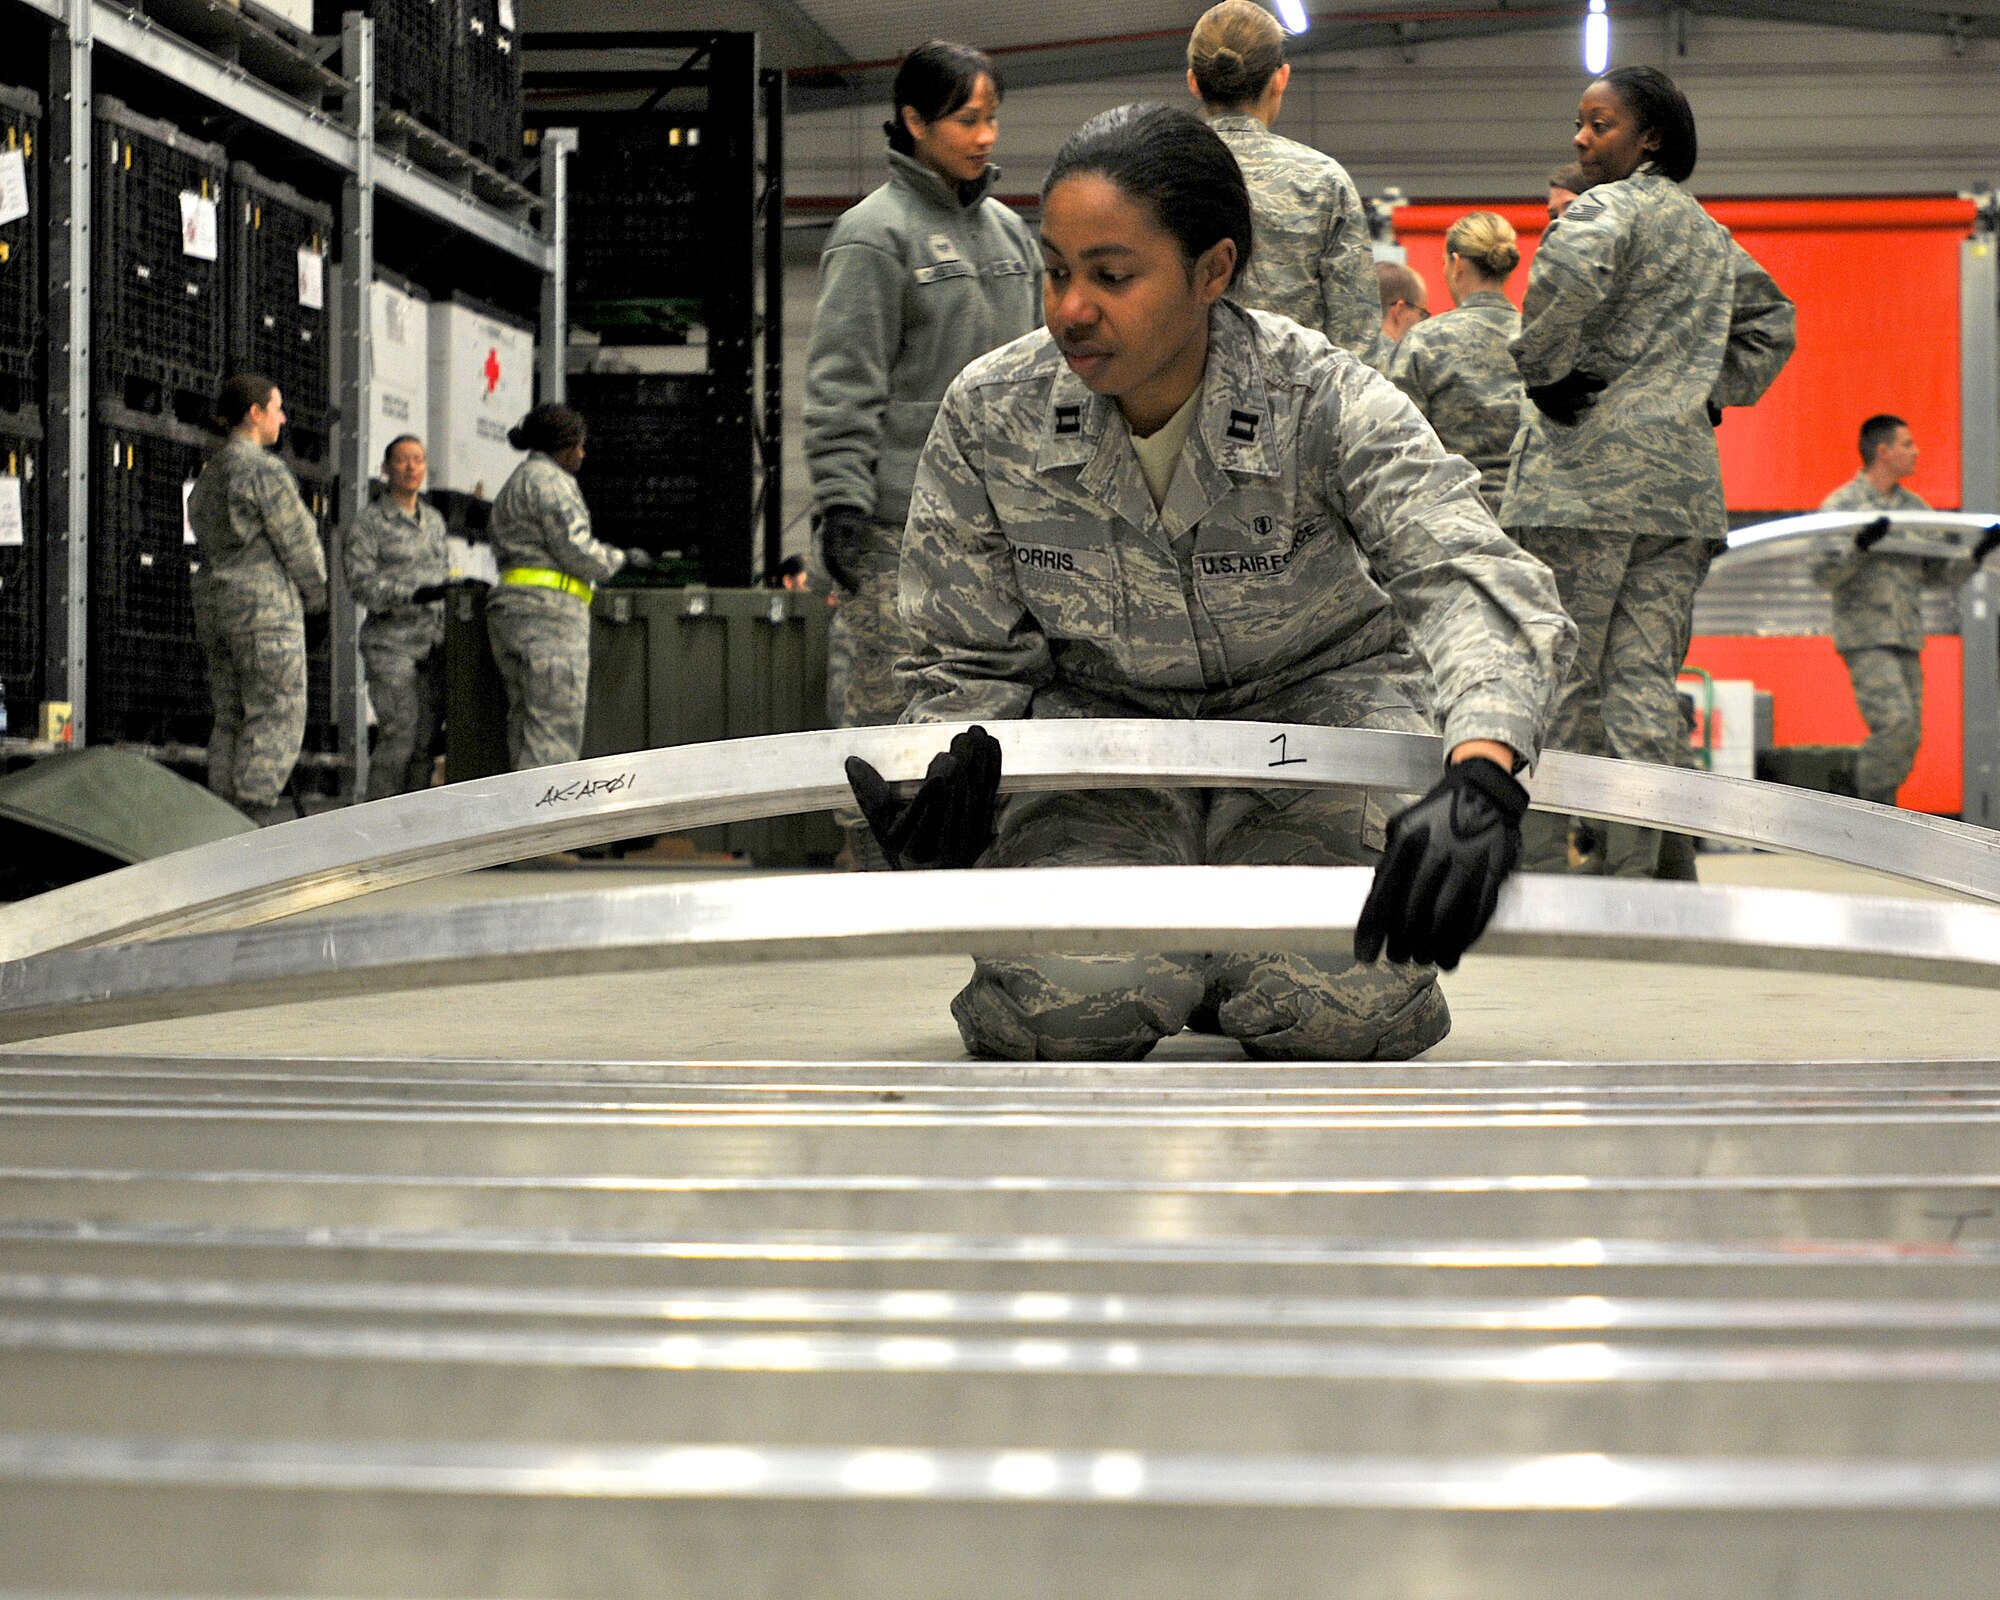 Capt. Paulencia Morris, 86th Dental Squadron, lays out parts of an expeditionary medical support tent in the medical logistics warehouse here Mar.3.  Members of the 86th Medical Group practiced assembling the EMEDS tent in preparation of their participation in an upcoming international mass casualty medical exercise held in the Netherlands.  (U.S. Air Force photo by Tech. Sgt. Markus M. Maier)